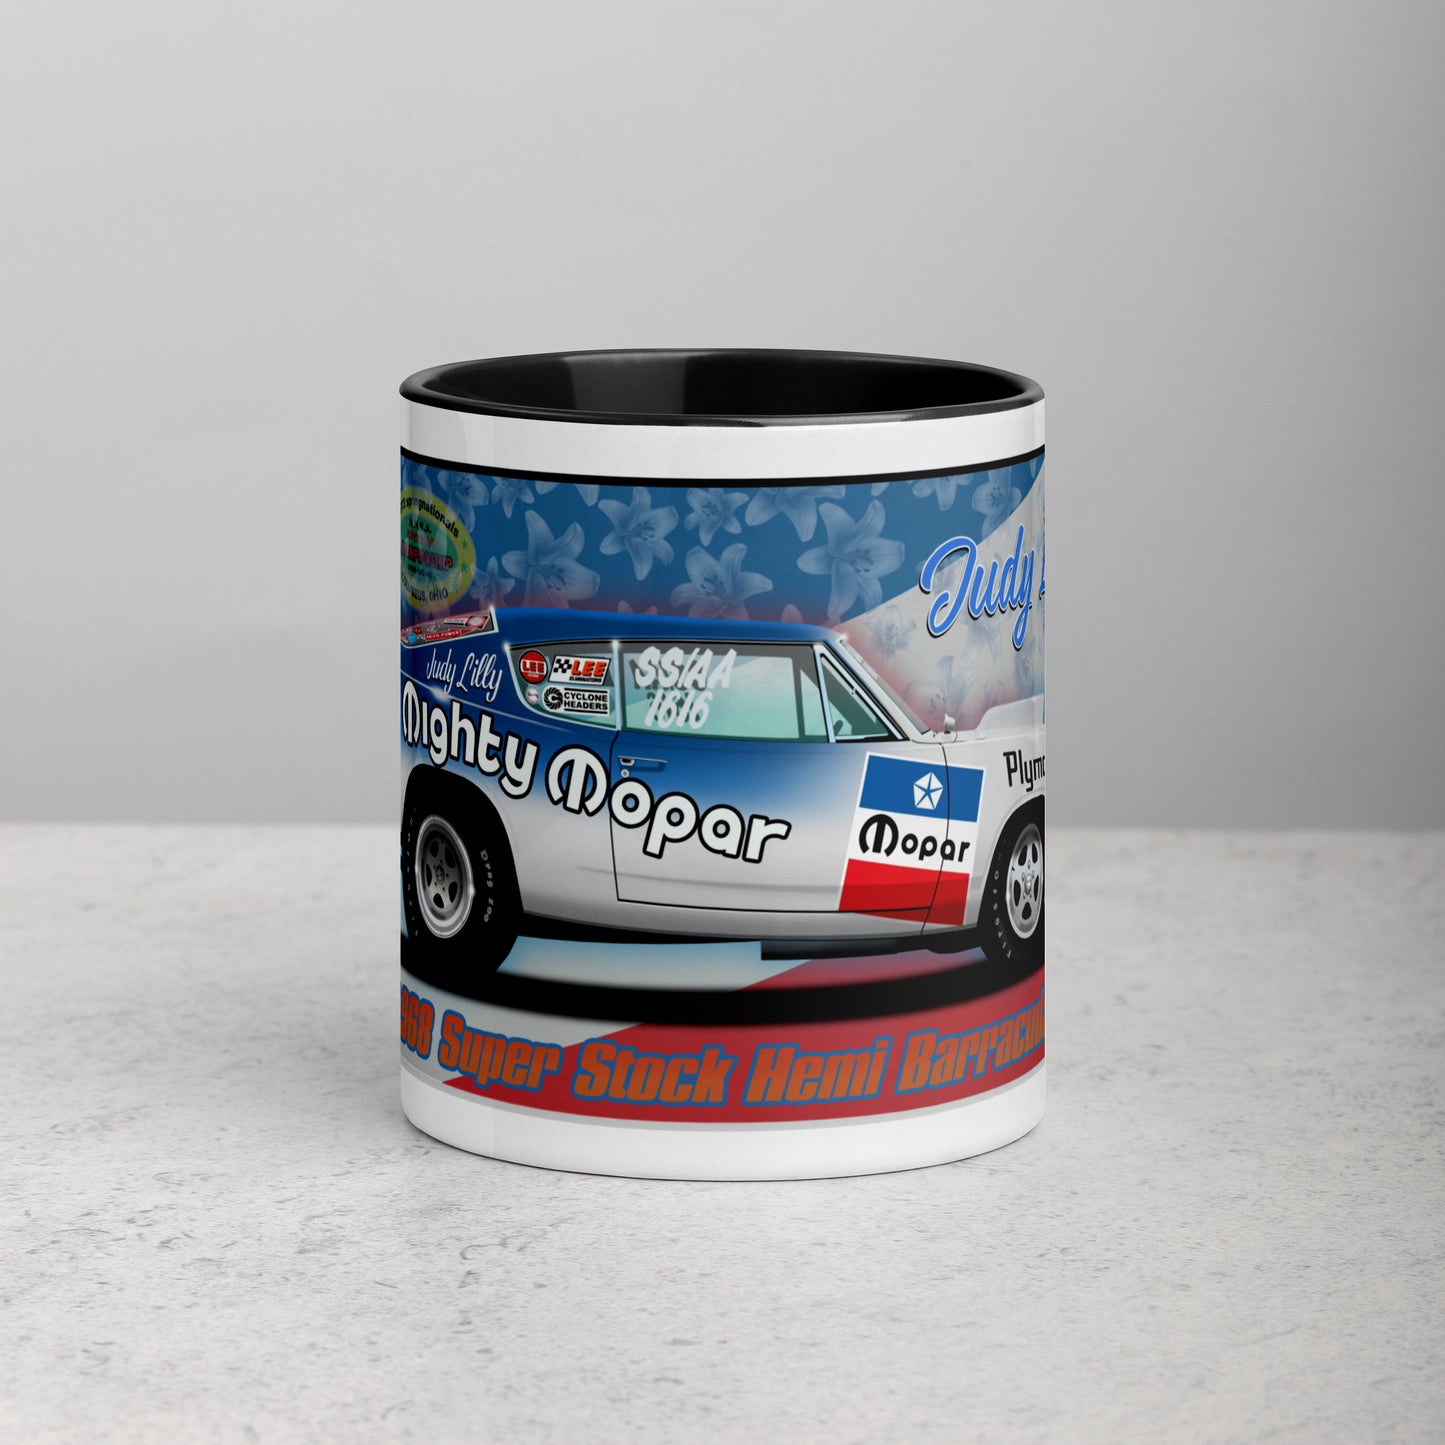 Judy Lilly Miss Mighty Mopar Mug with Color Inside